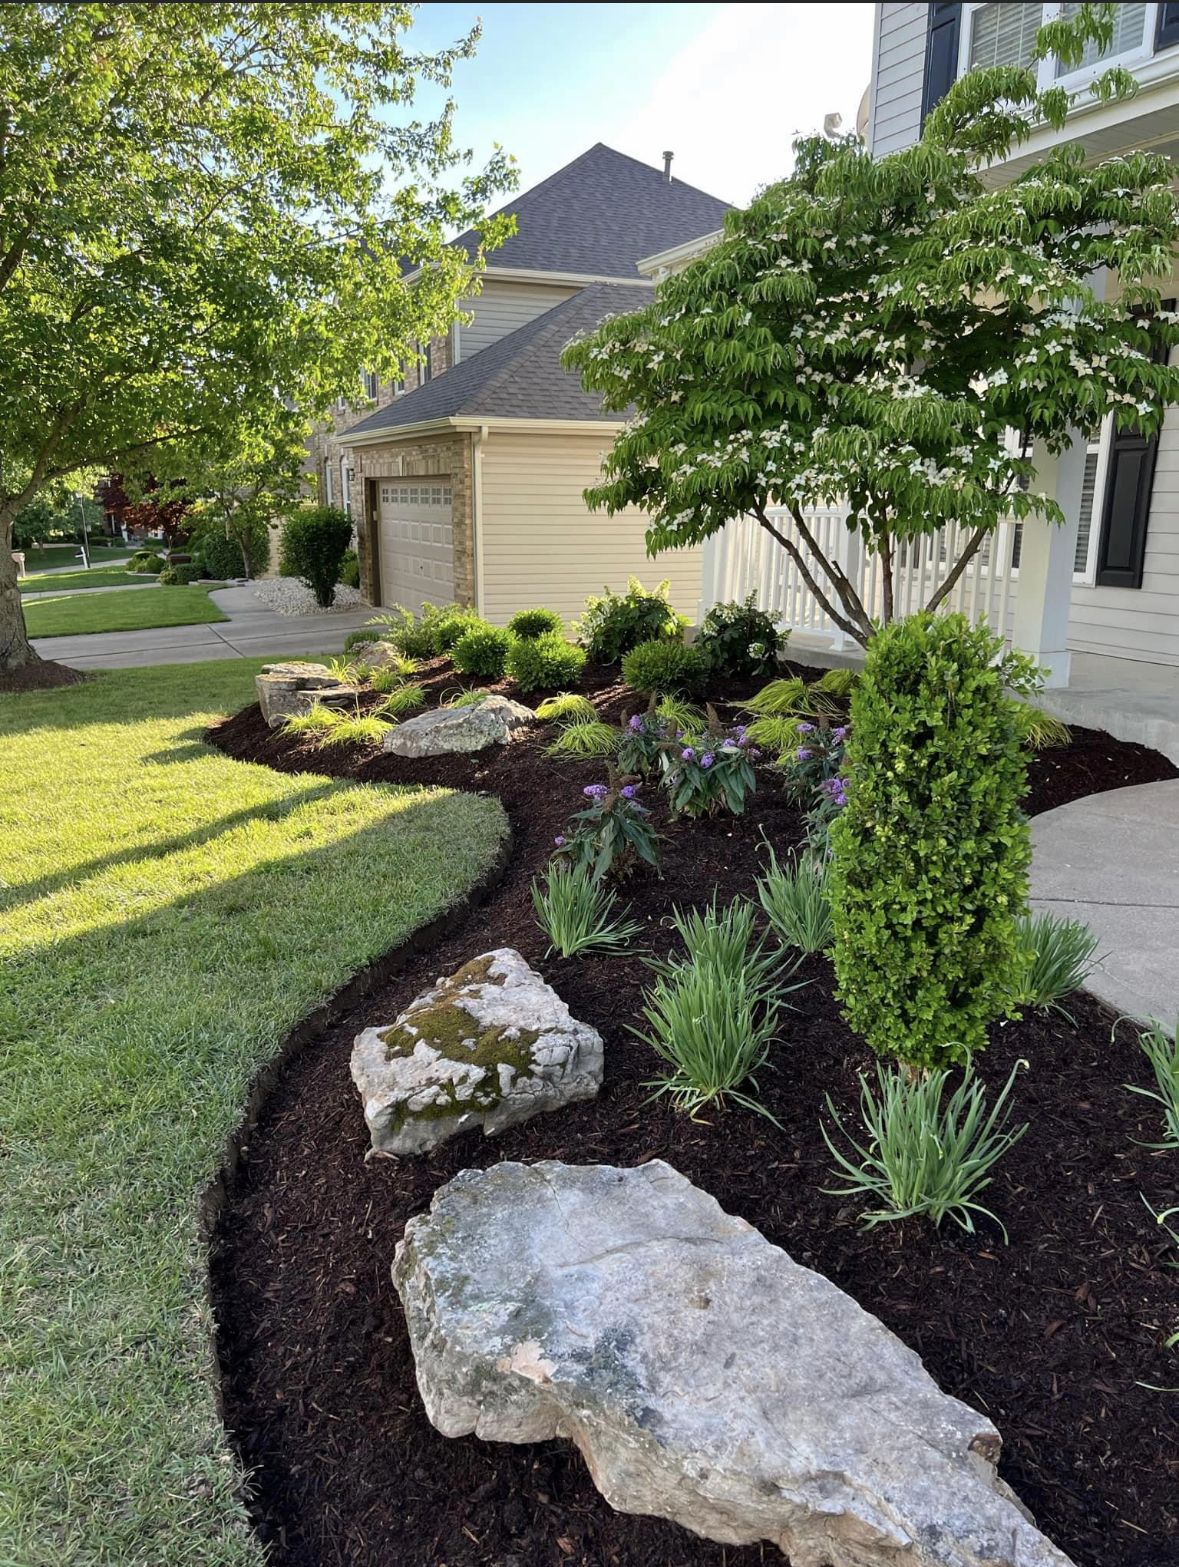 Transforming the Area Next to Your House Through Landscaping